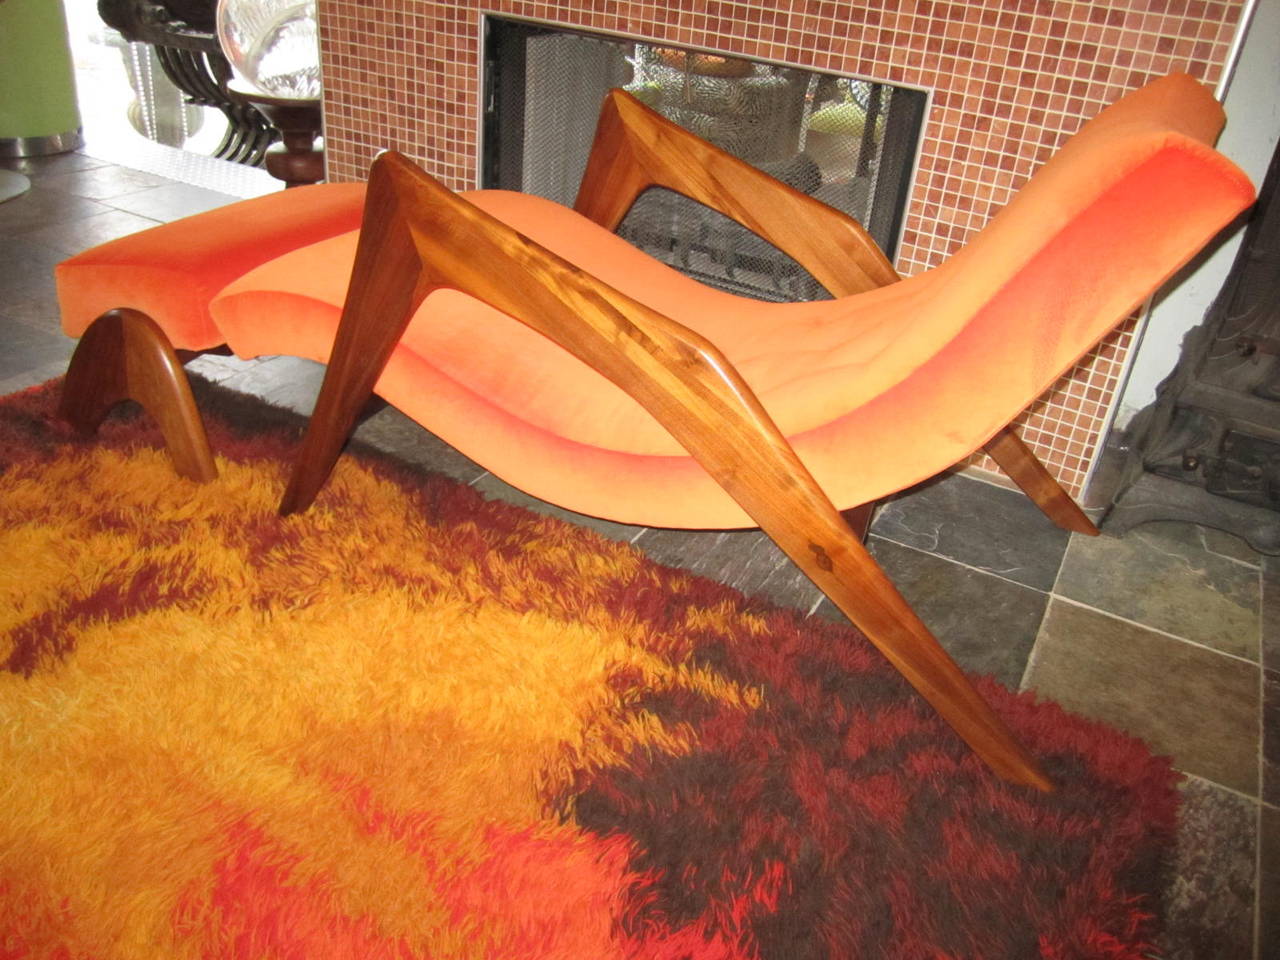 Mid-20th Century Adrian Pearsall “Grasshopper” Chaise Lounge with Ottoman for Craft Associates